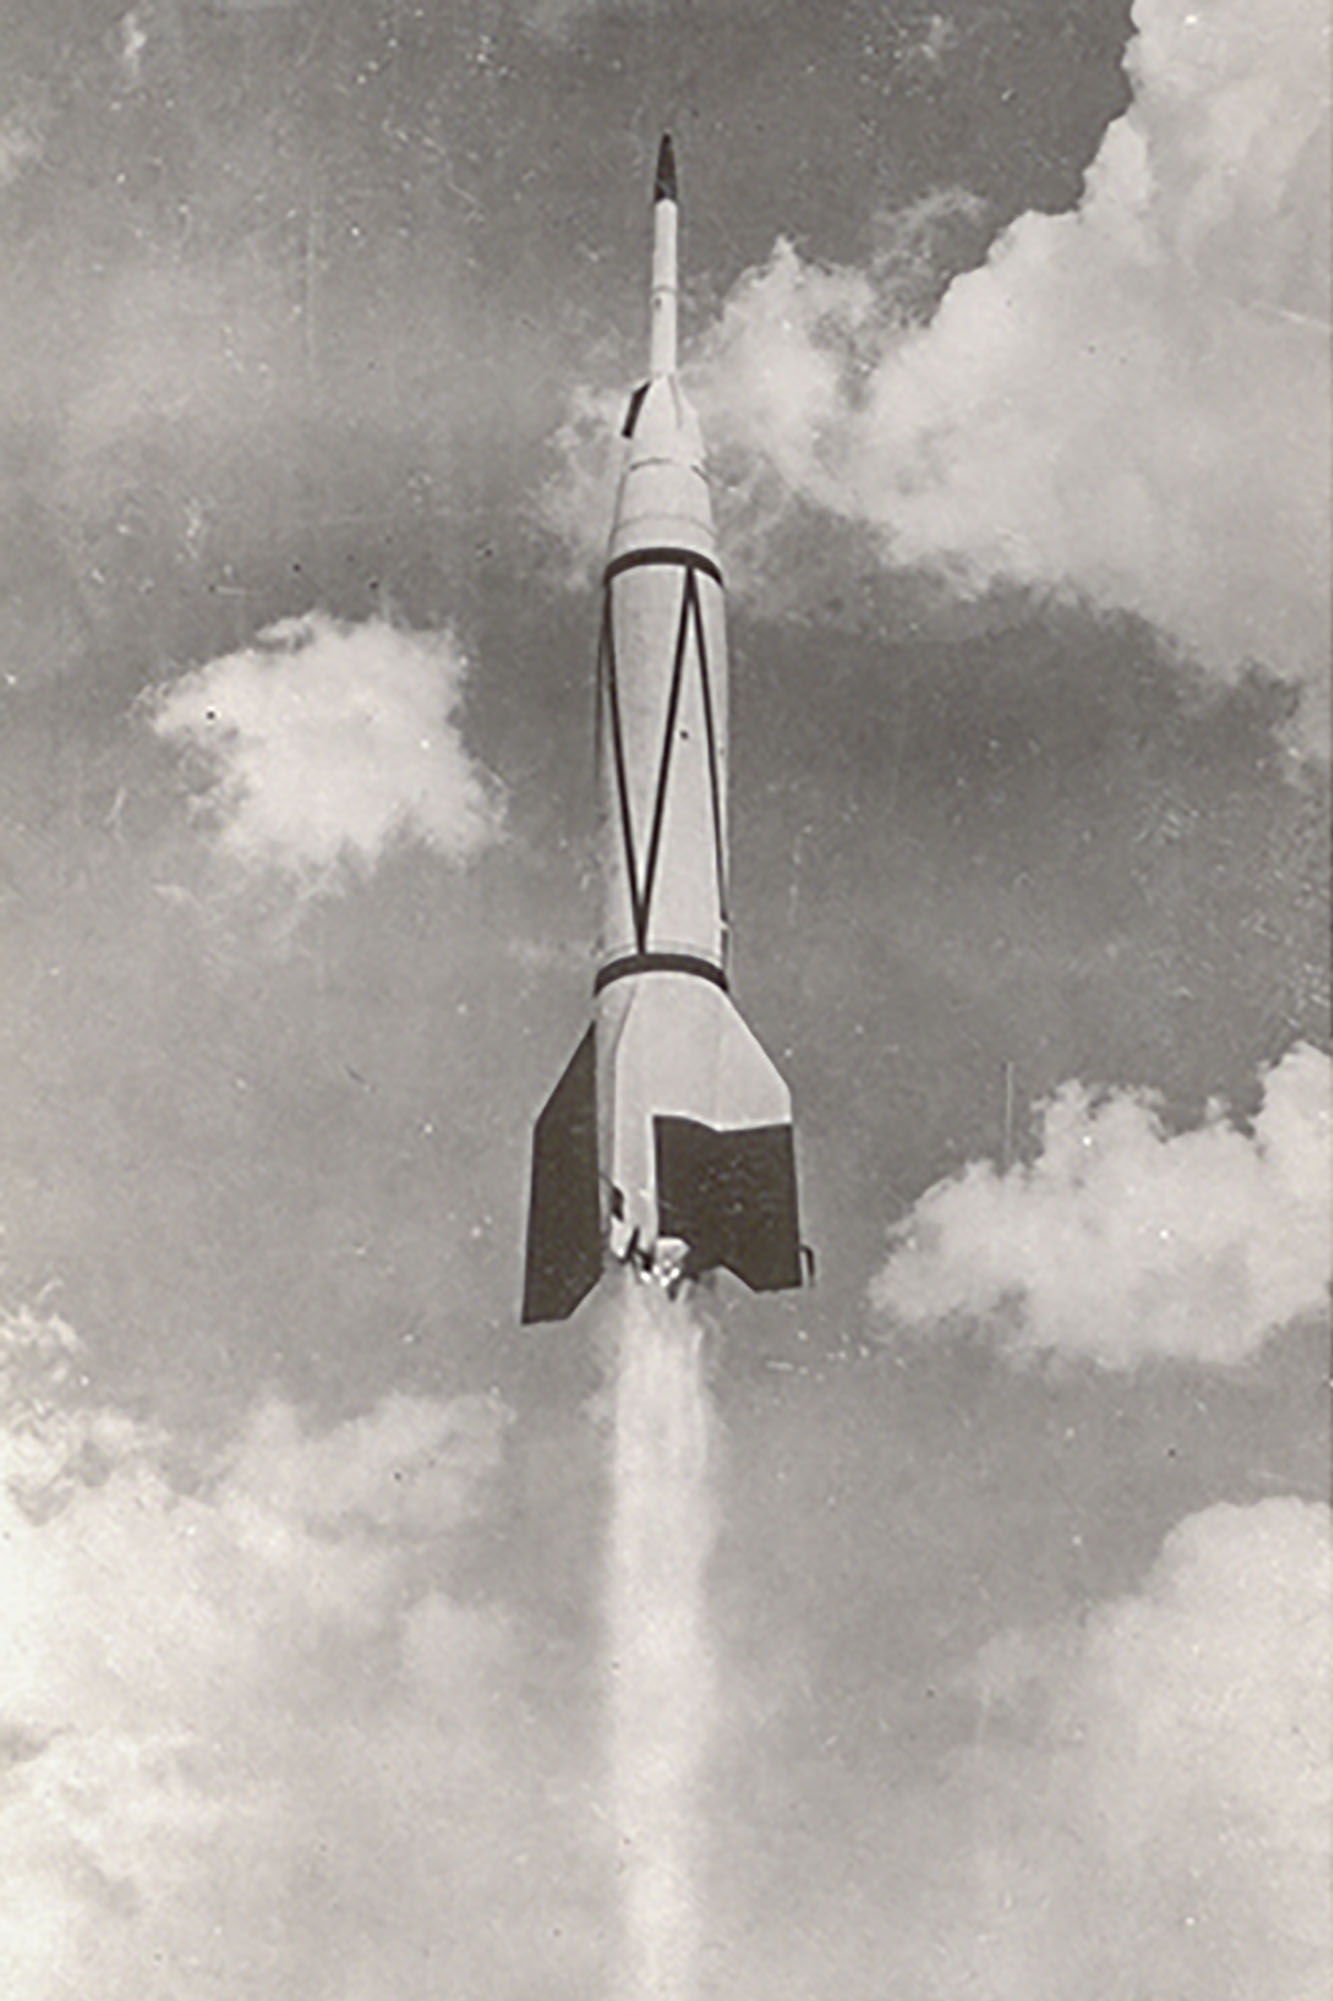 black and white photo of the Bumper-WAC space shuttle launching